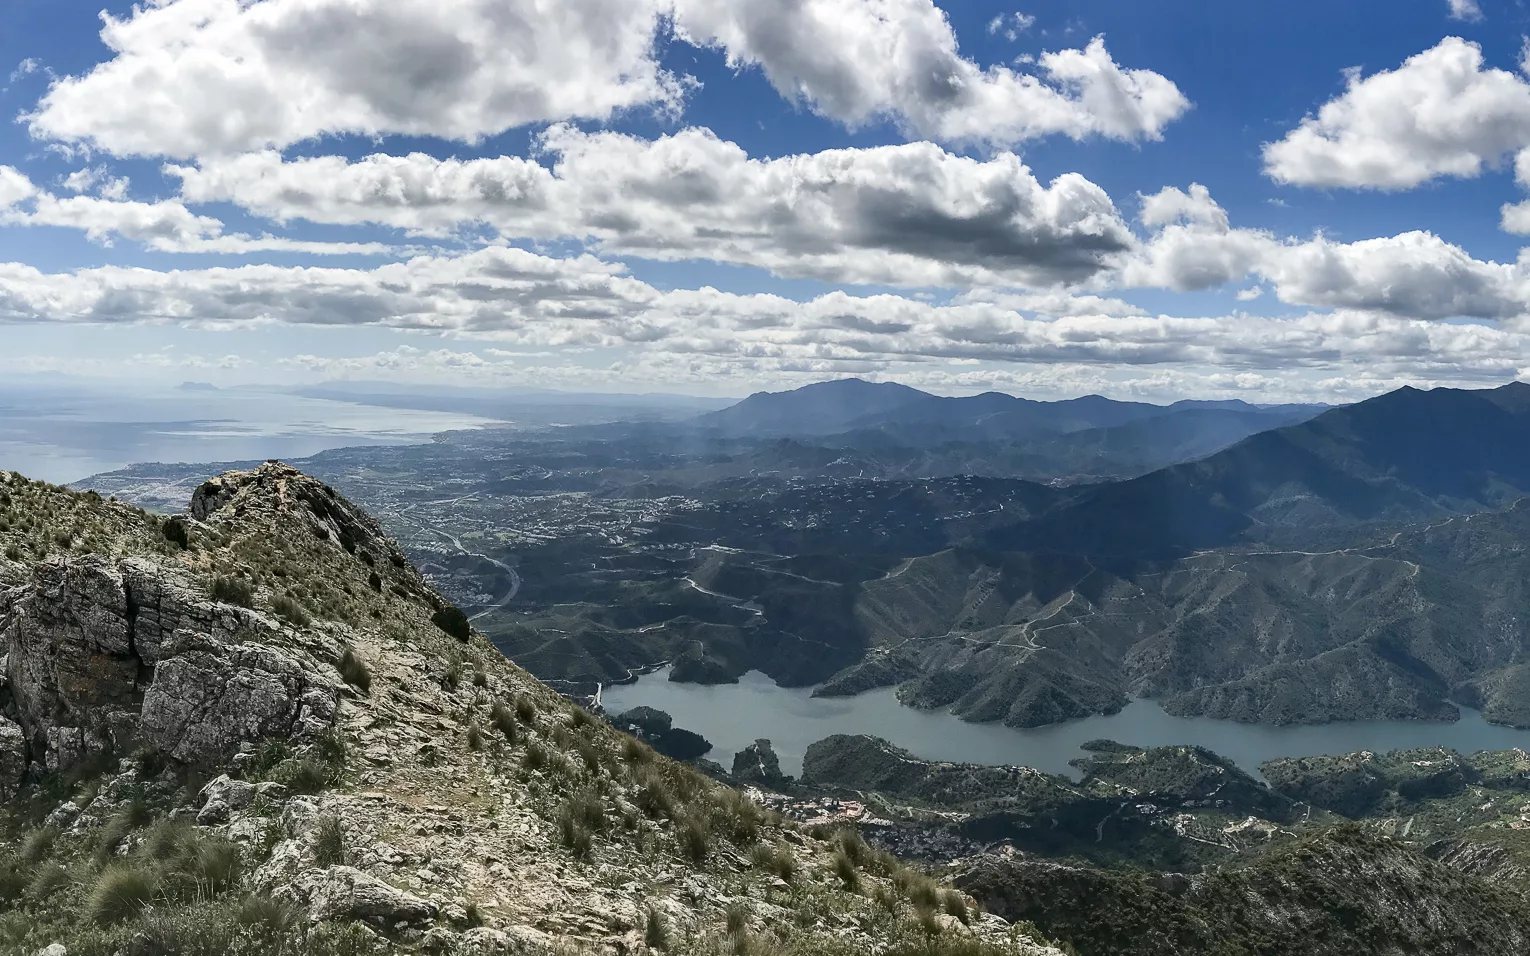 View of Istan and Gibraltar when Hiking La Concha Mountain in Marbella